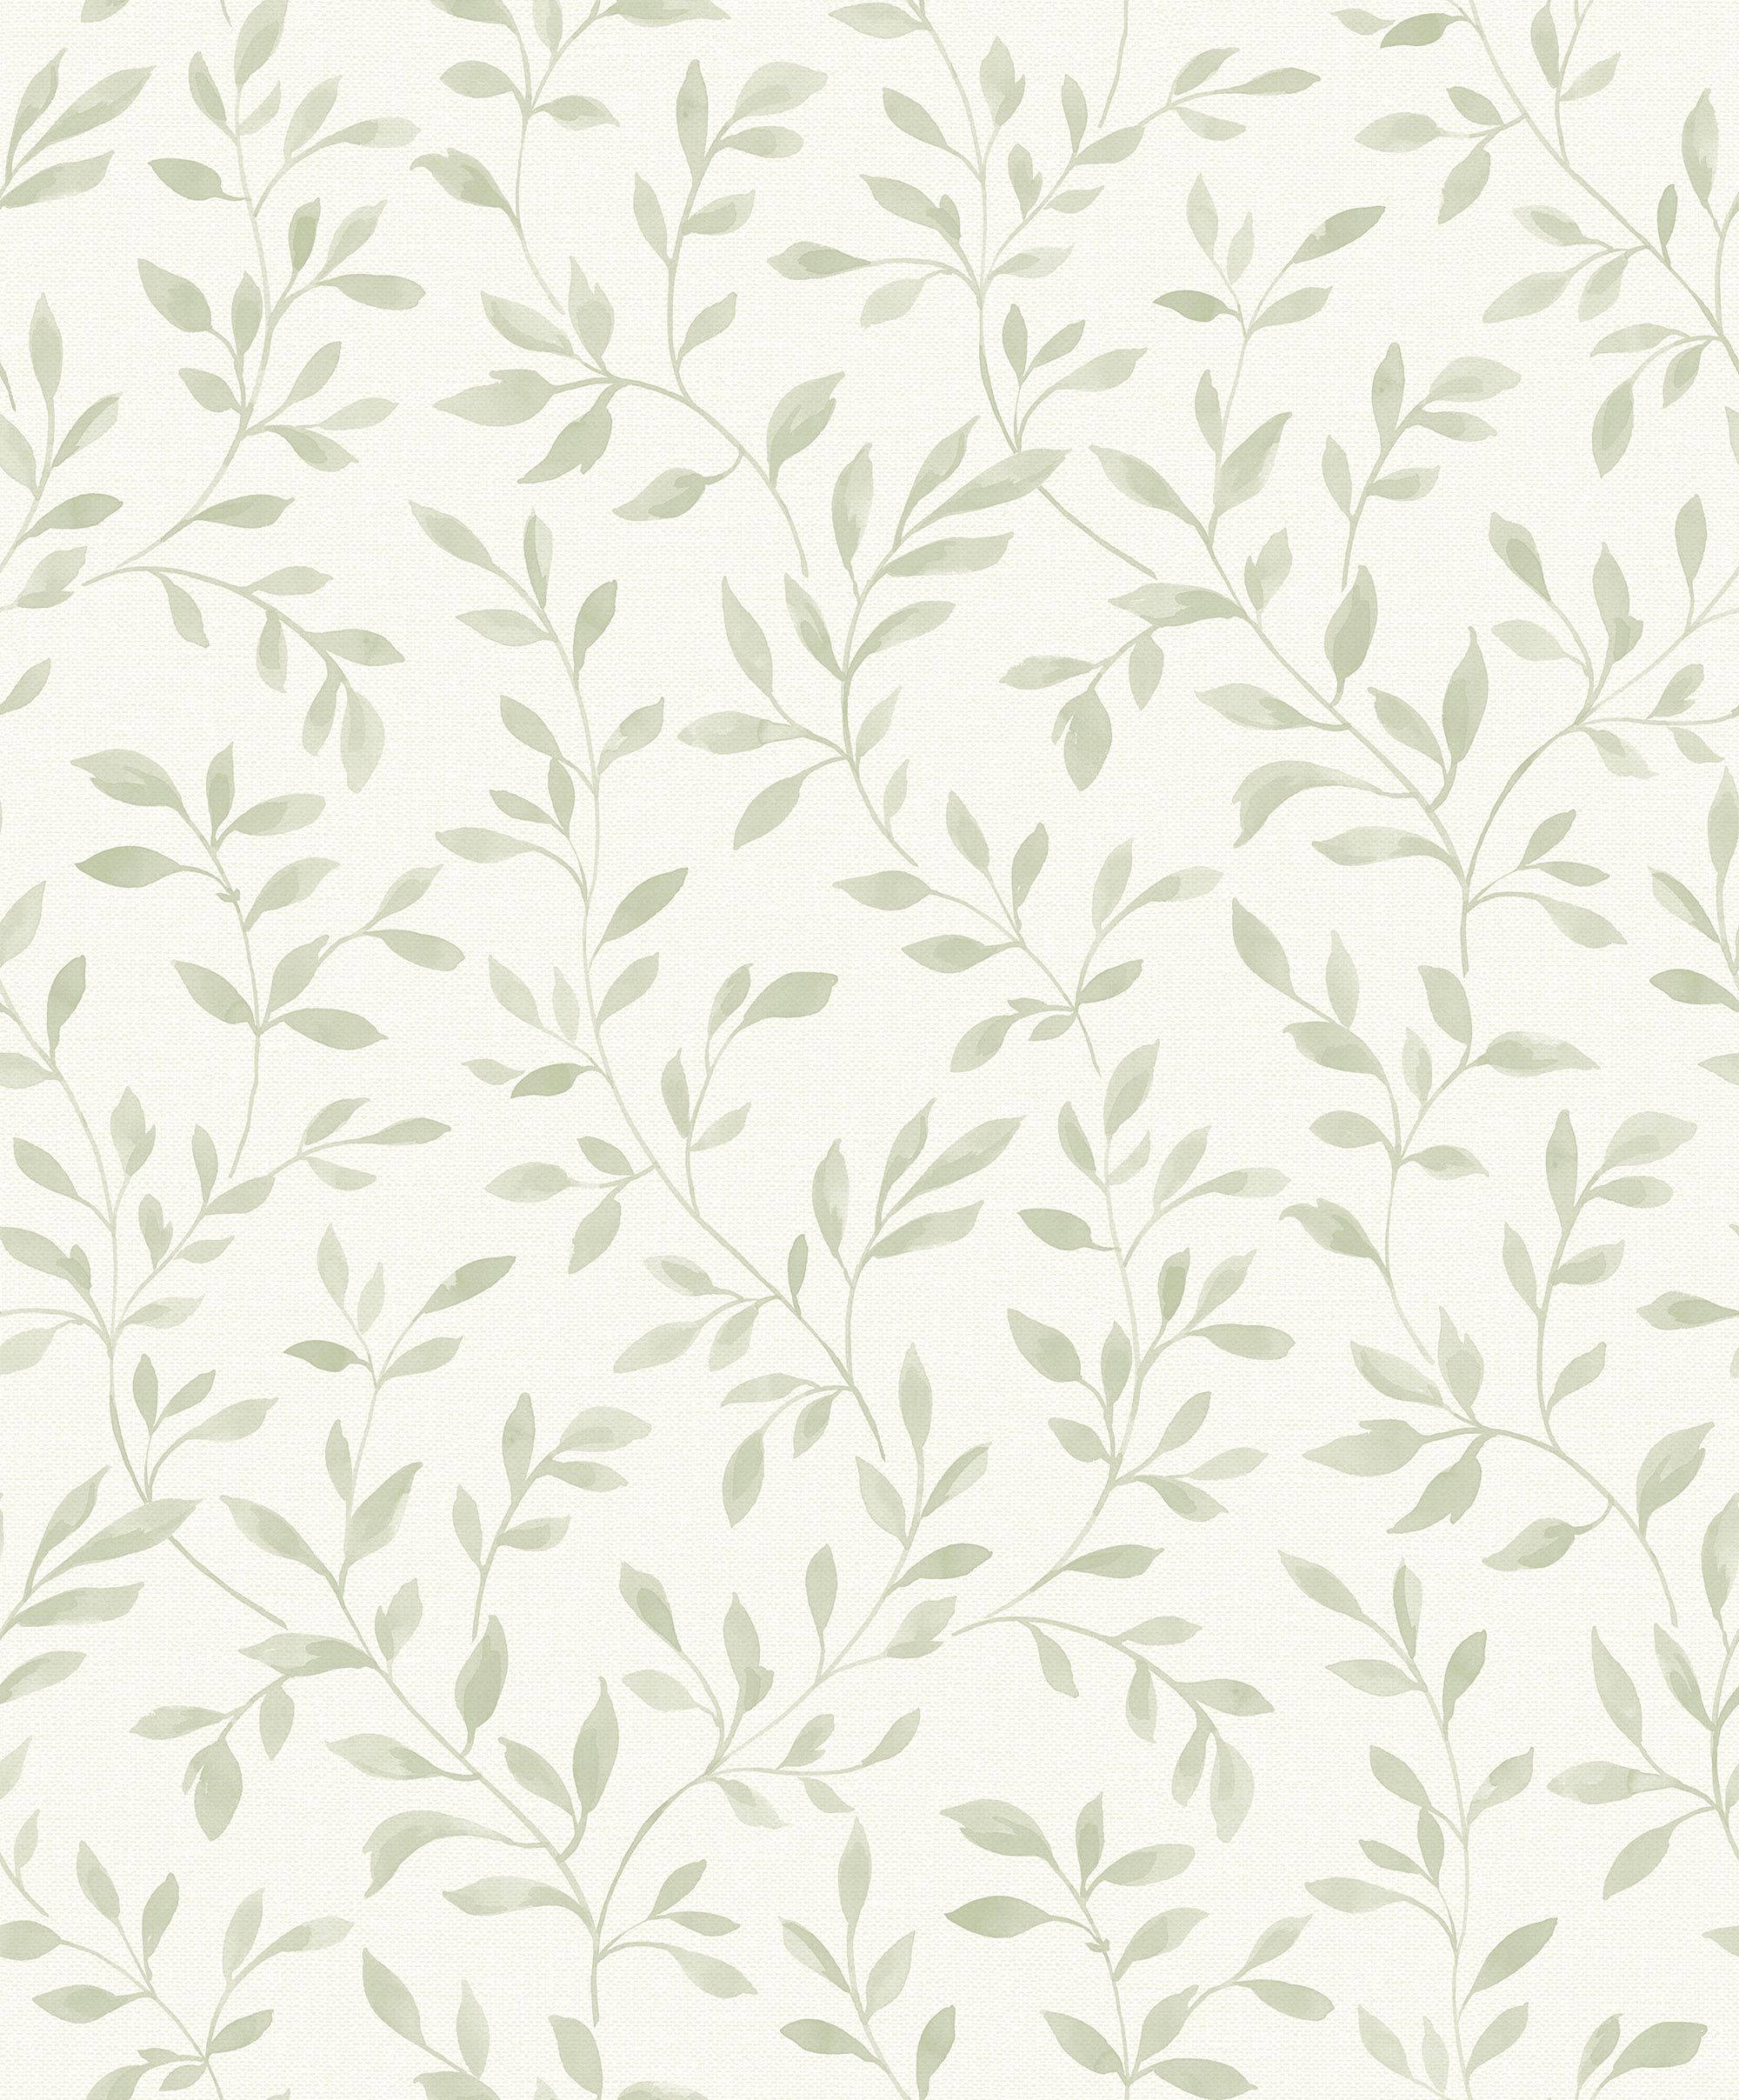 A green and white leaf pattern on the wall - Sage green